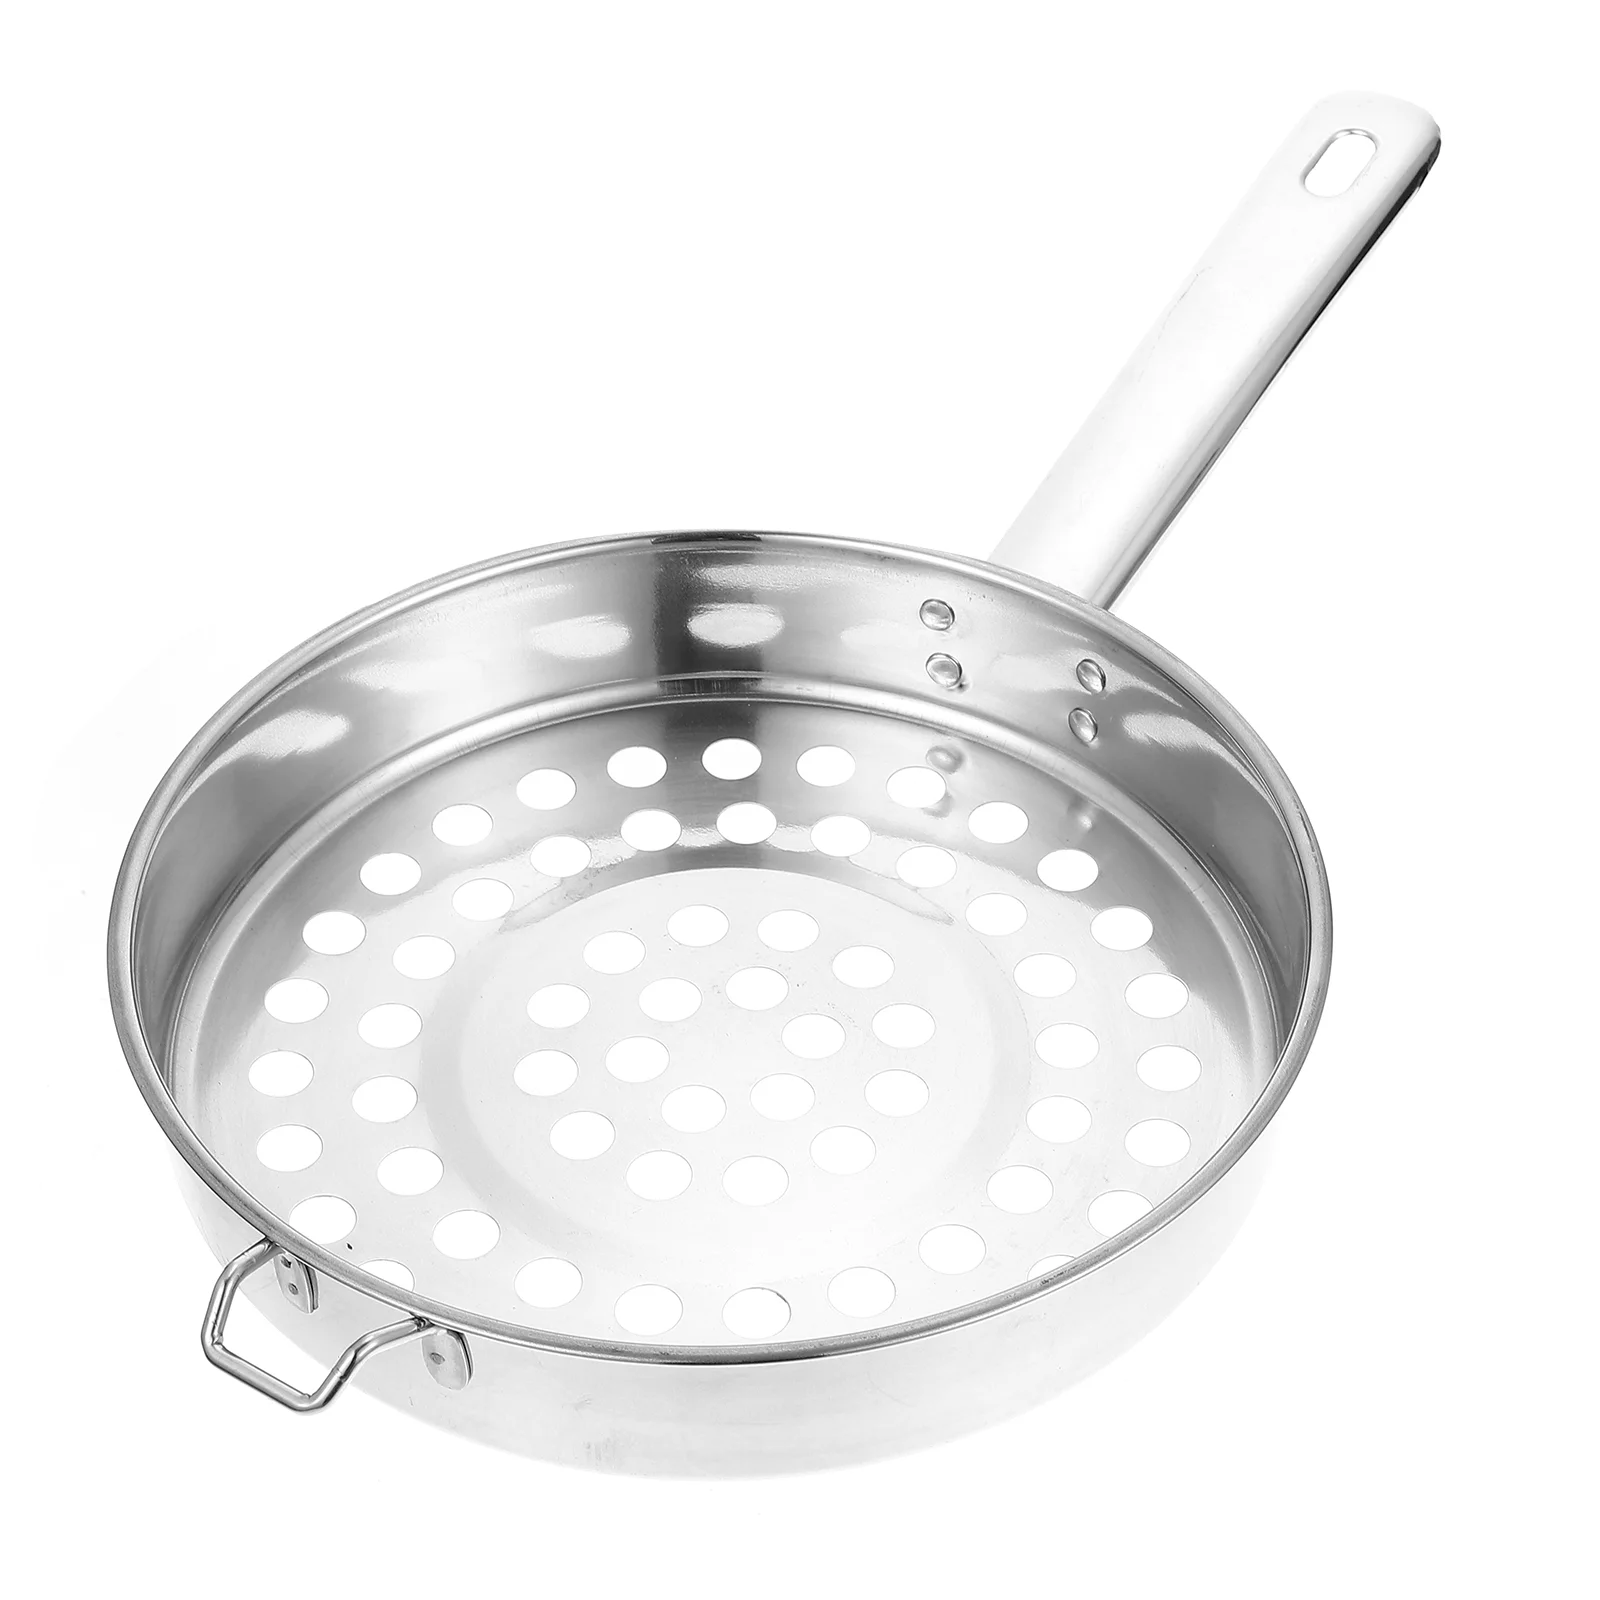 Drying Basket Fried Food Strainer Frying Spoon Metal Colander Stainless Steel Slotted Hand Asian Ladle Measuring Spoons